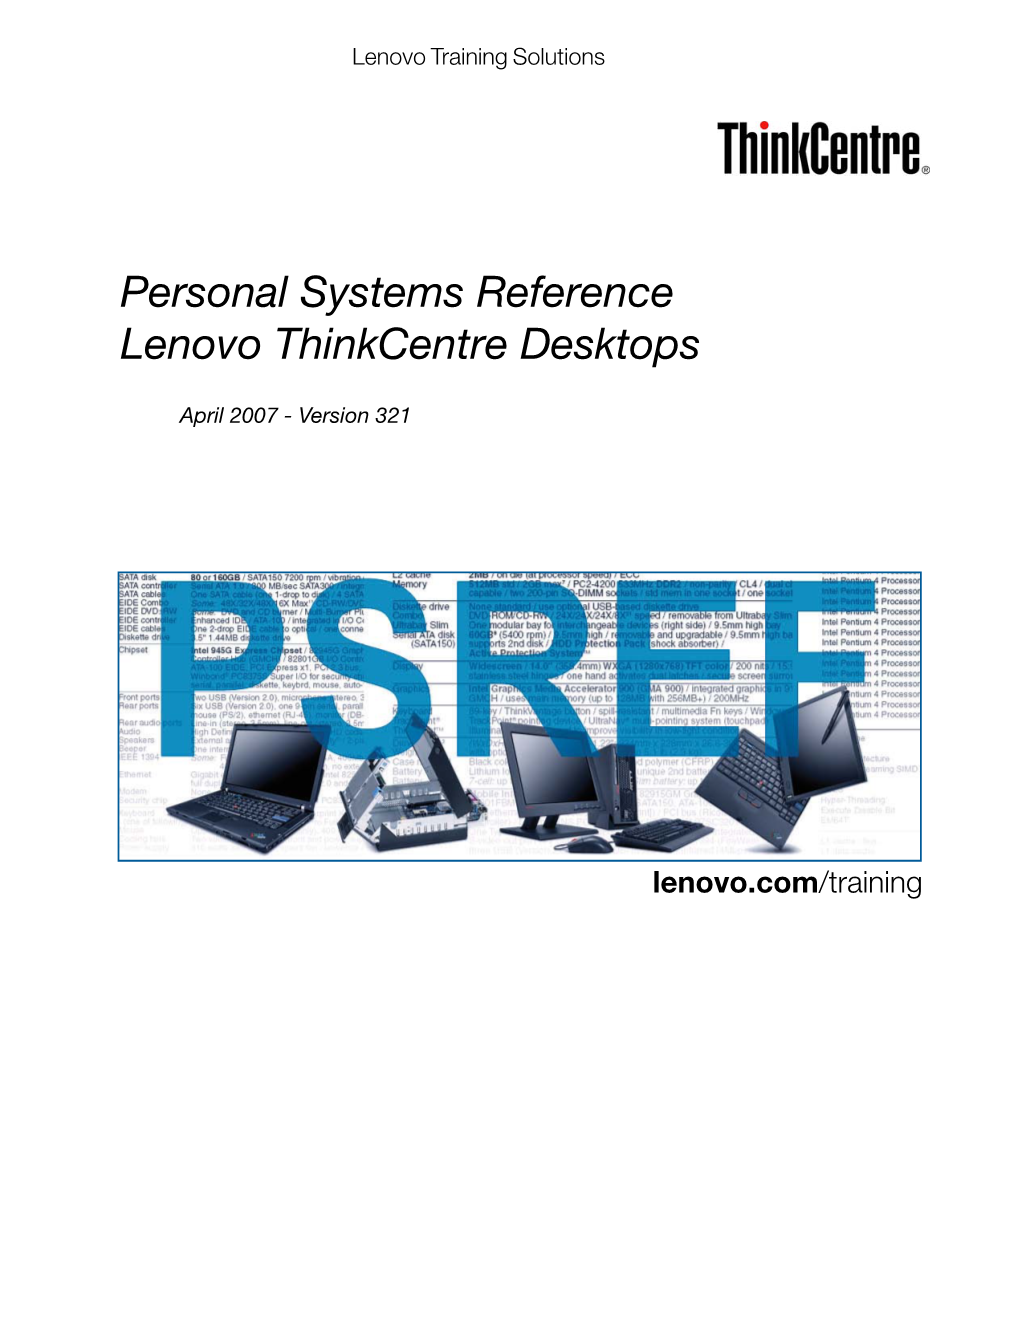 Personal Systems Reference Lenovo Thinkcentre Desktops